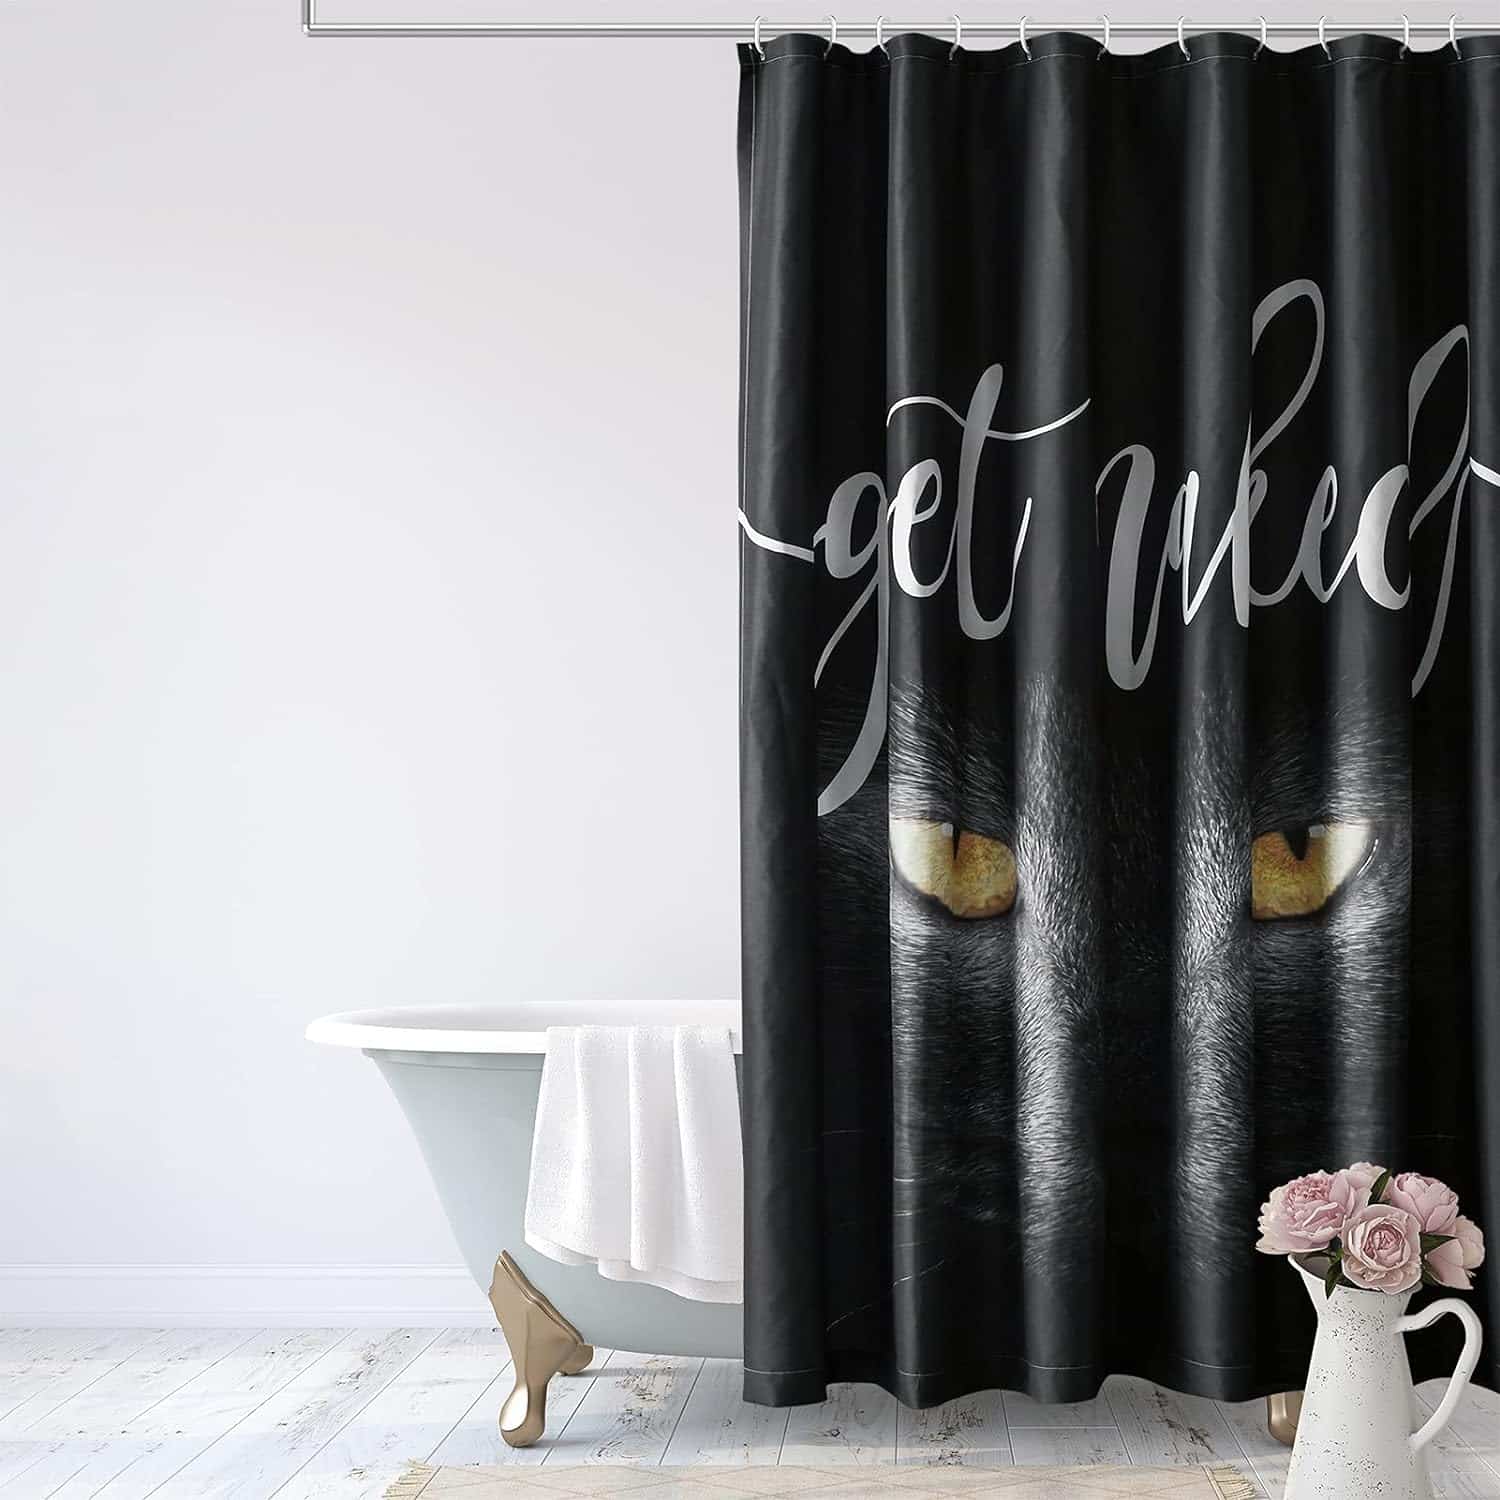 Alimumu Get Naked Shower Curtain: A Fun and Chic Addition to Your Bathroom